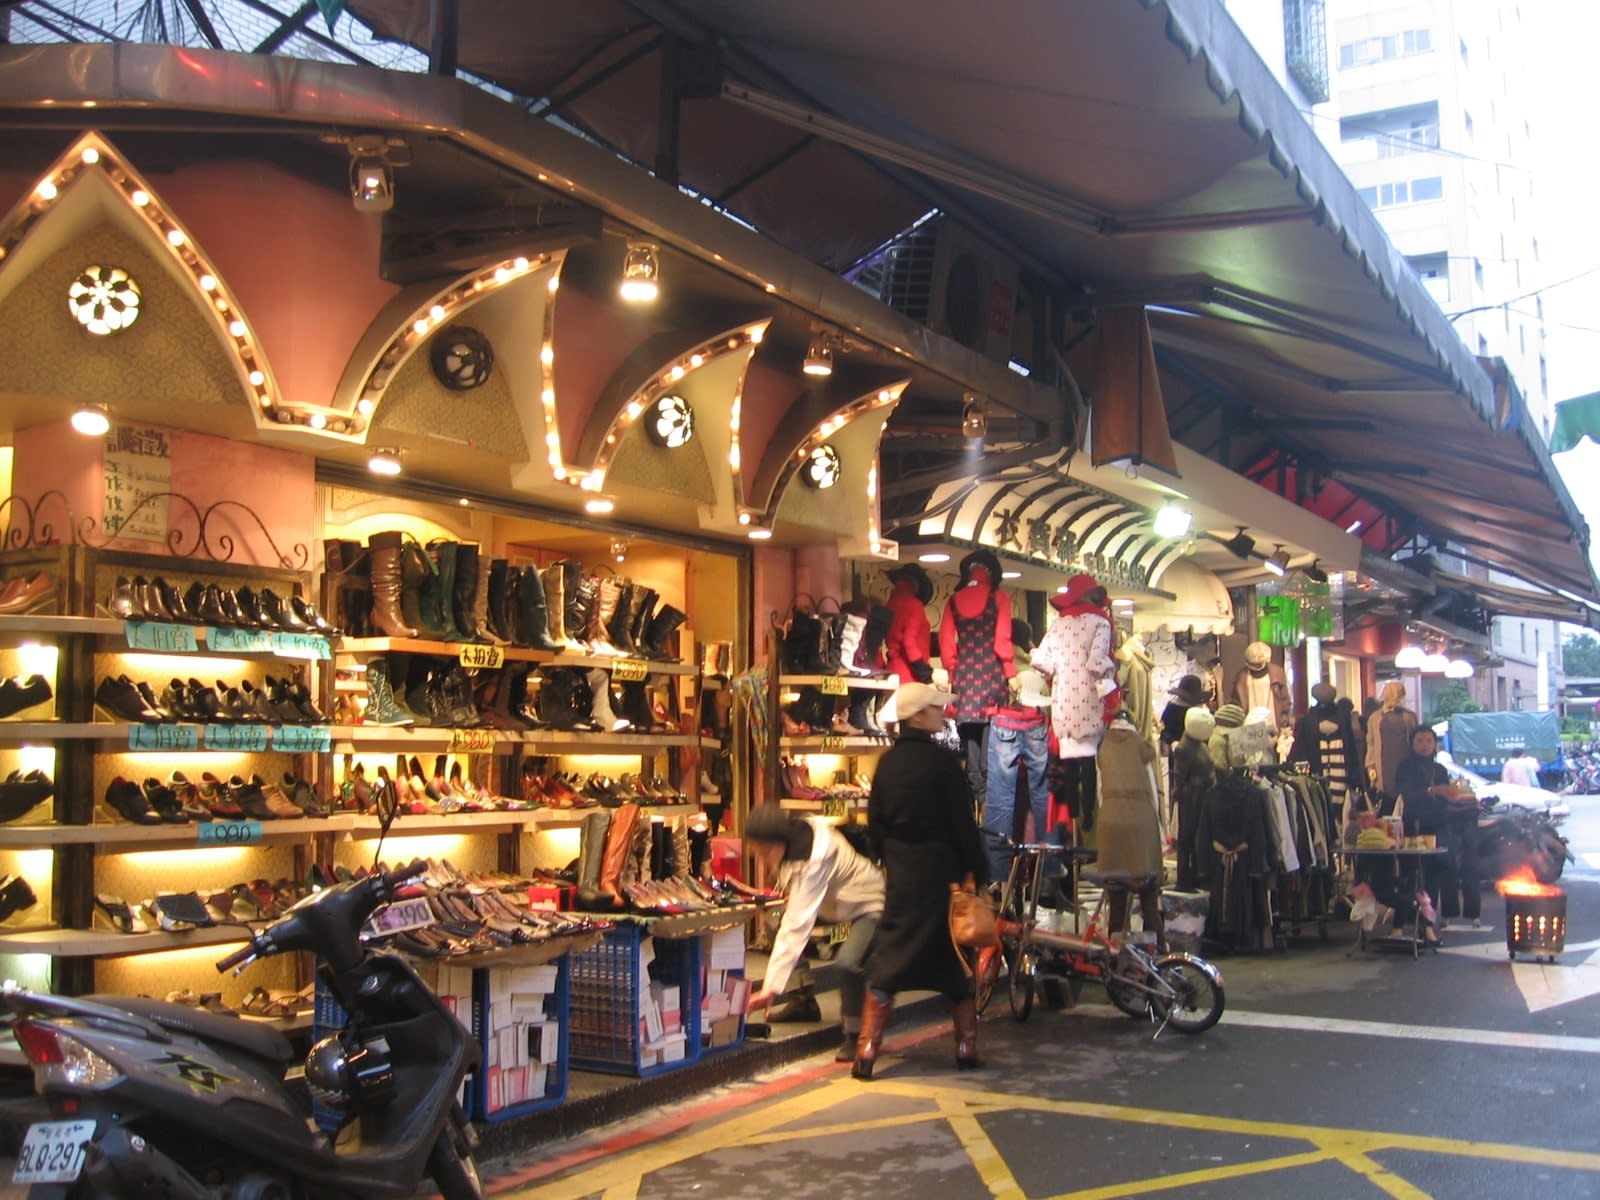 10 Best Taipei Shopping Malls And Markets For Intensive Retail Images, Photos, Reviews